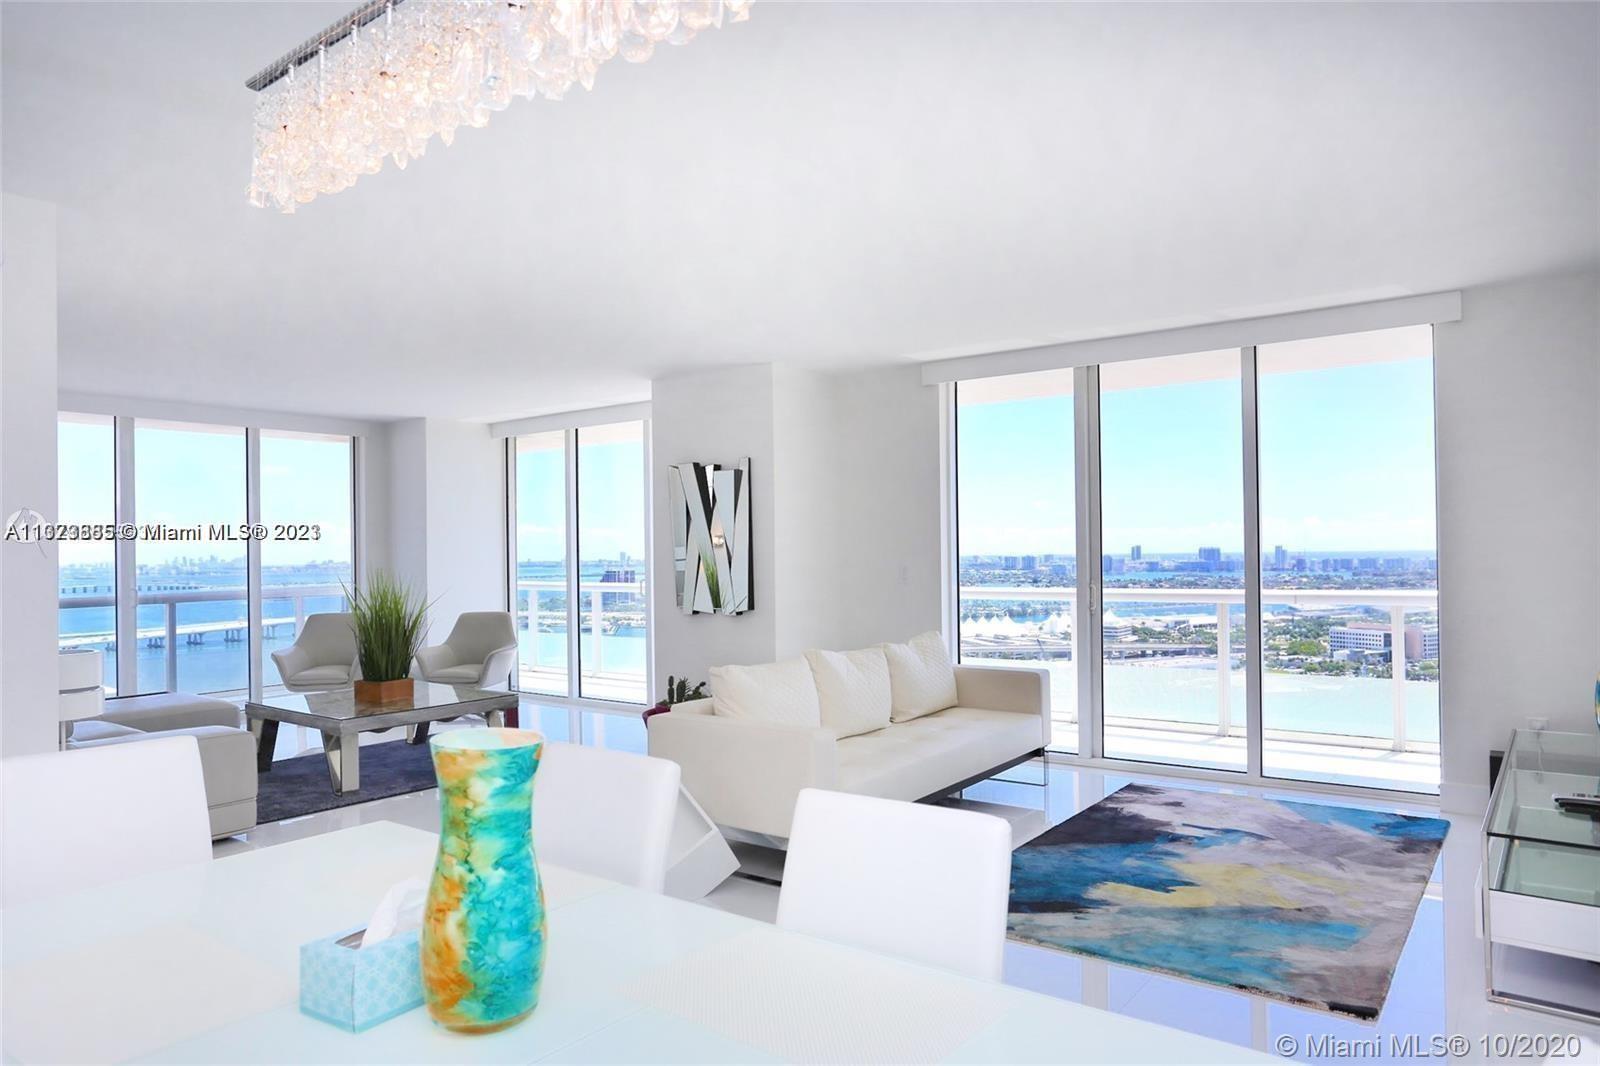 Photo 1 of 50 Biscayne Apt 3402 in Miami - MLS A11373885